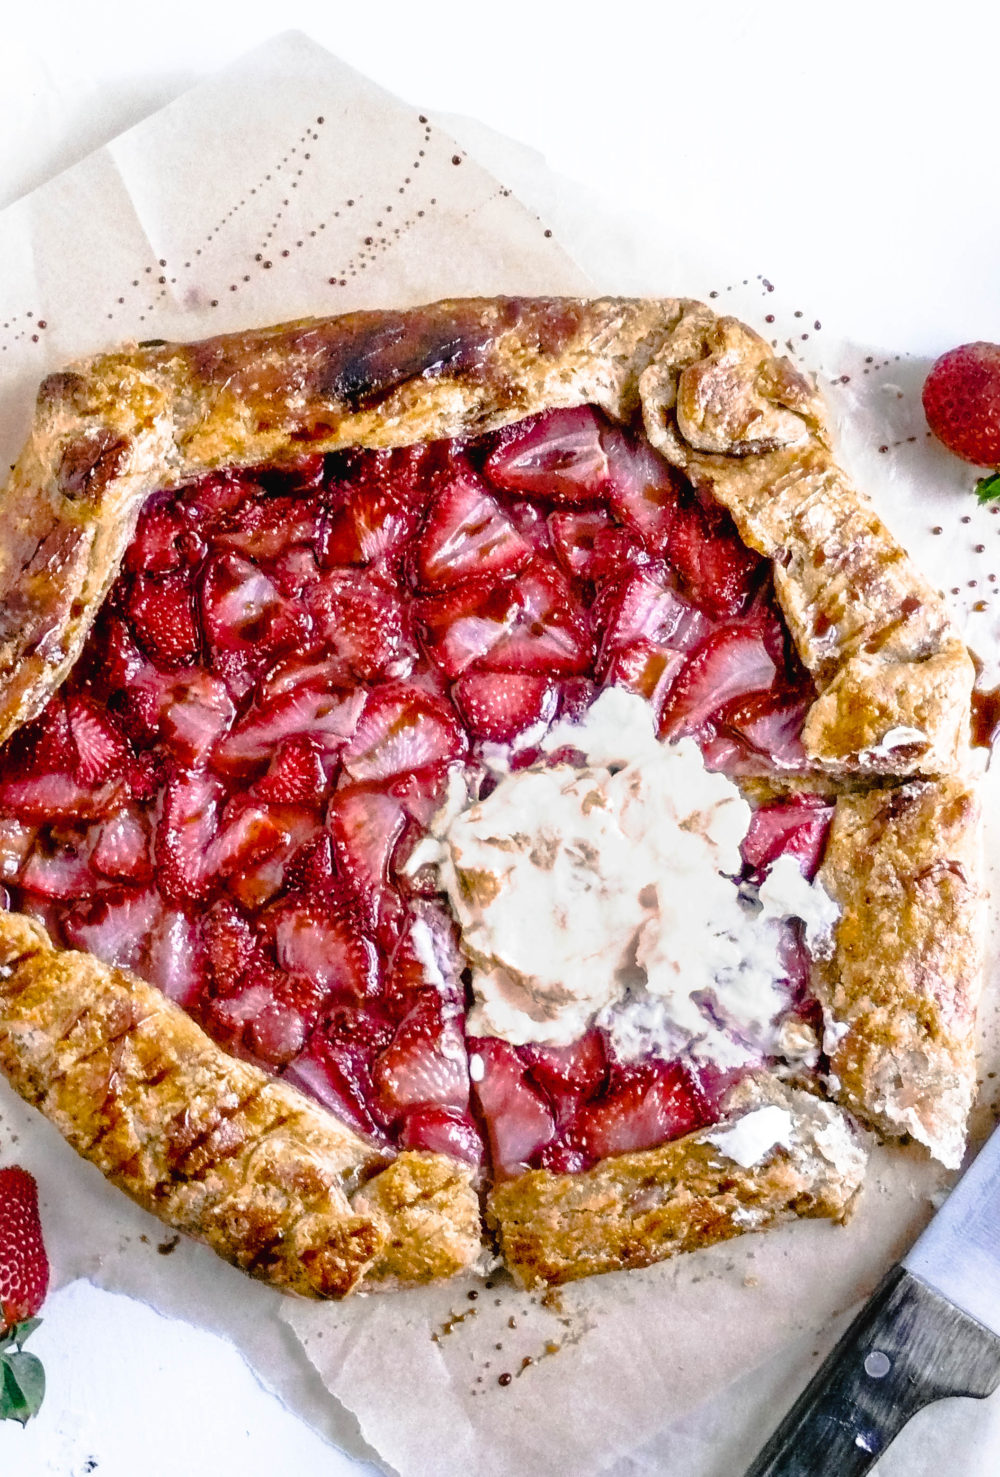 Final Whole Wheat Strawberry Balsamic Galette